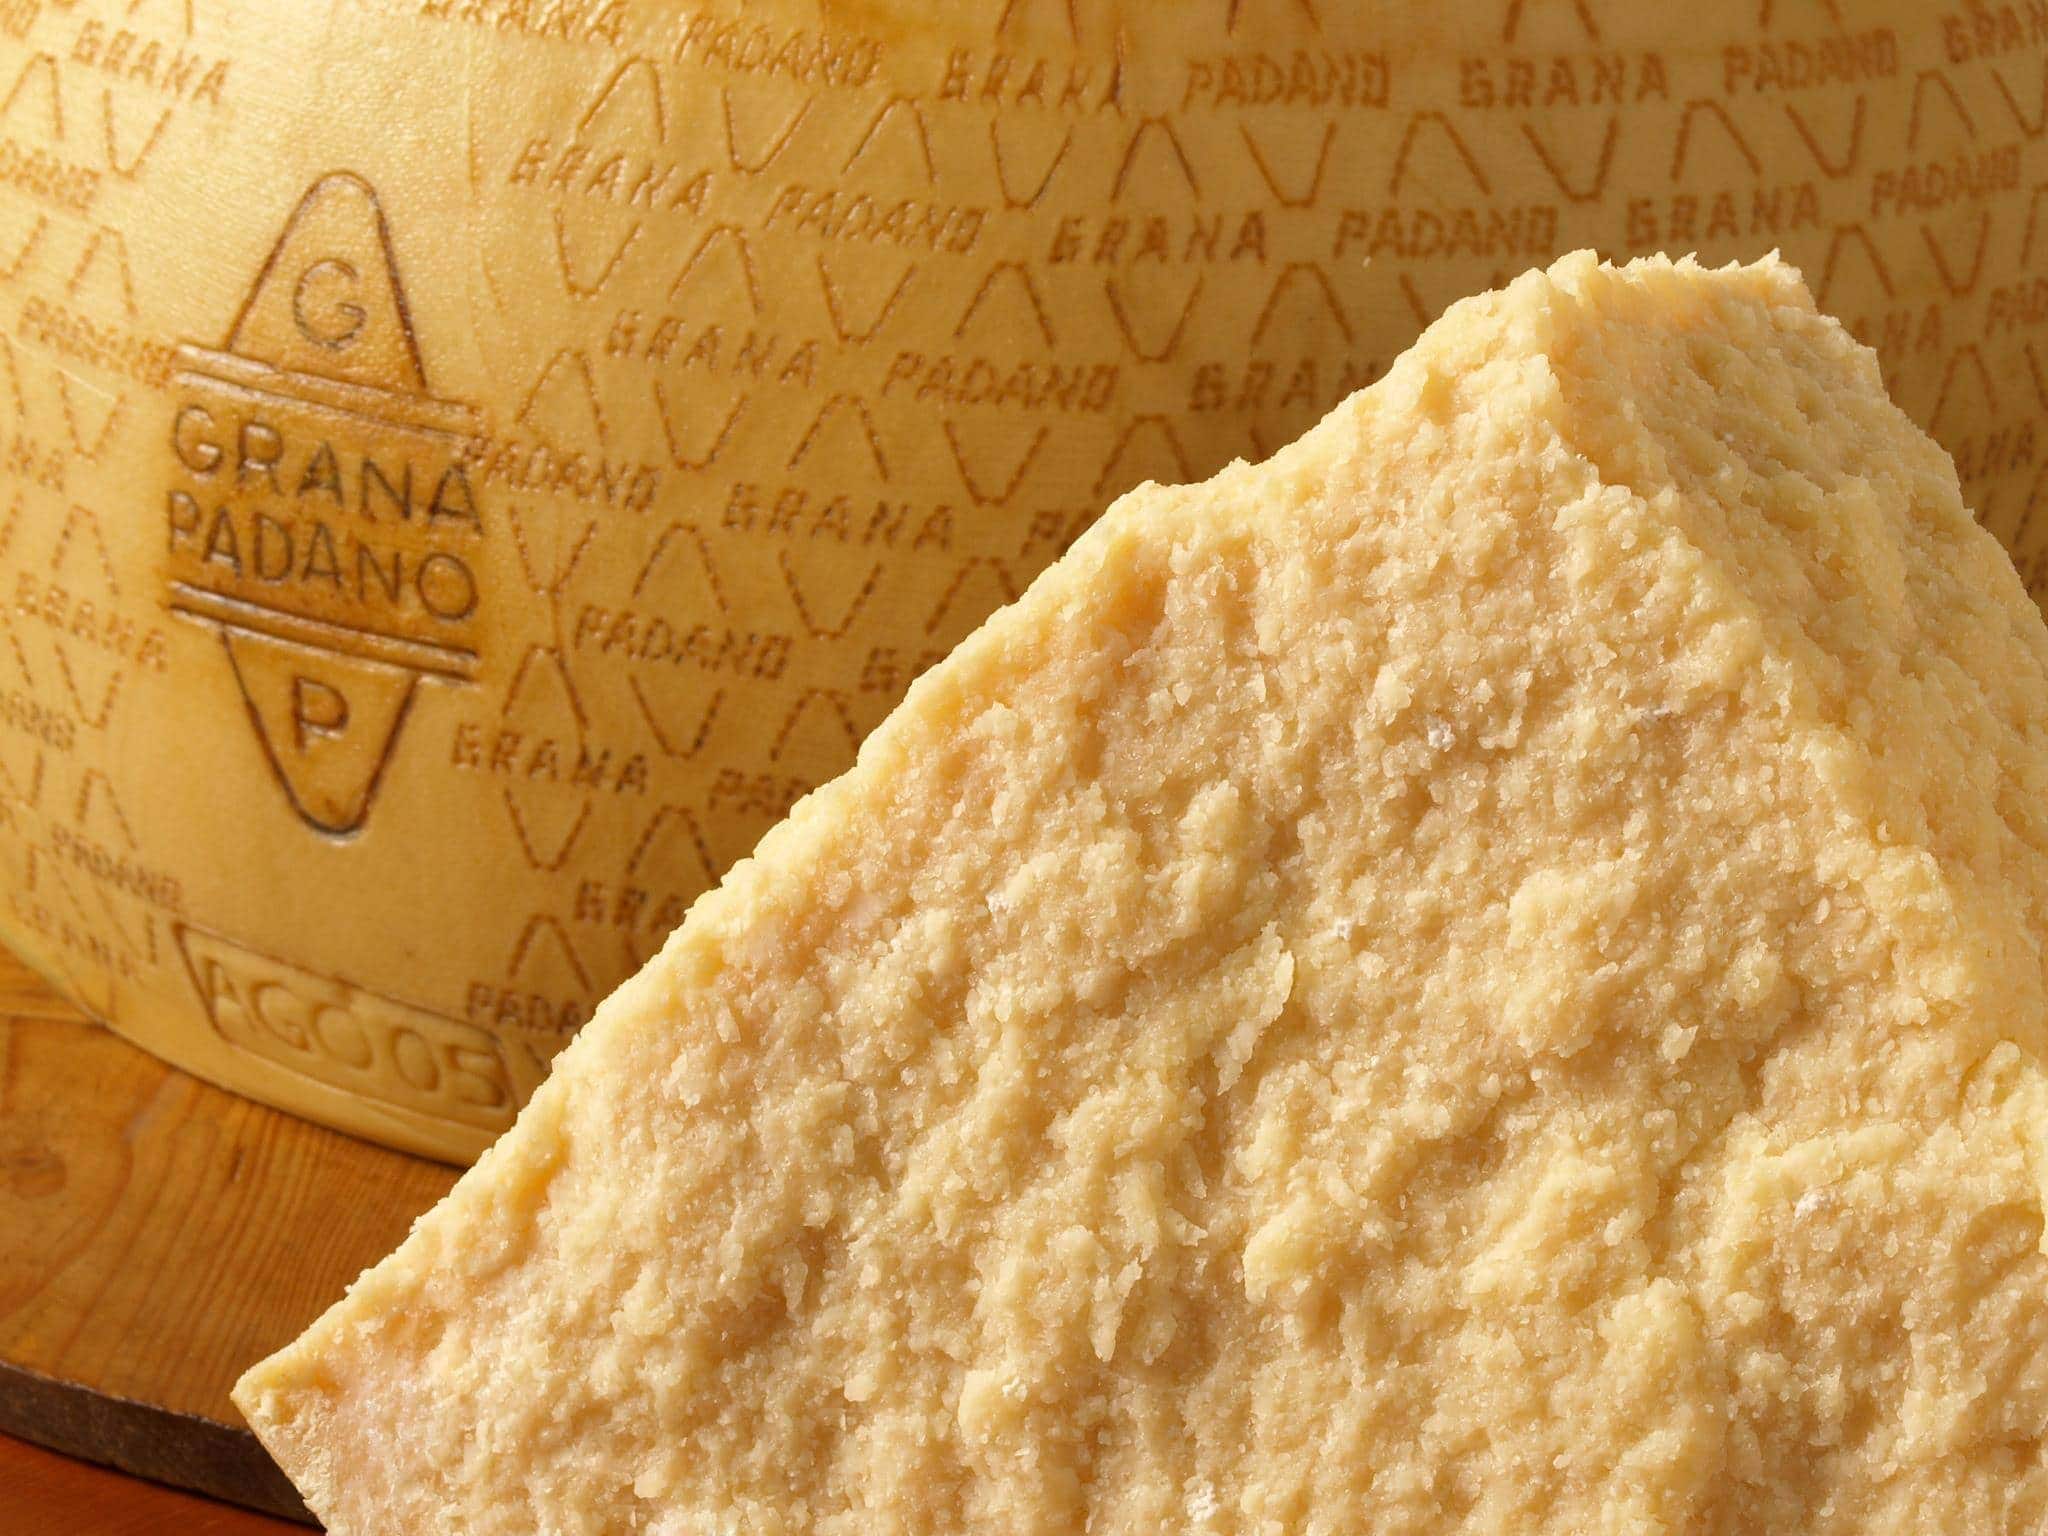 An Grana is Padano? What Cheese Immensely Popular Italian